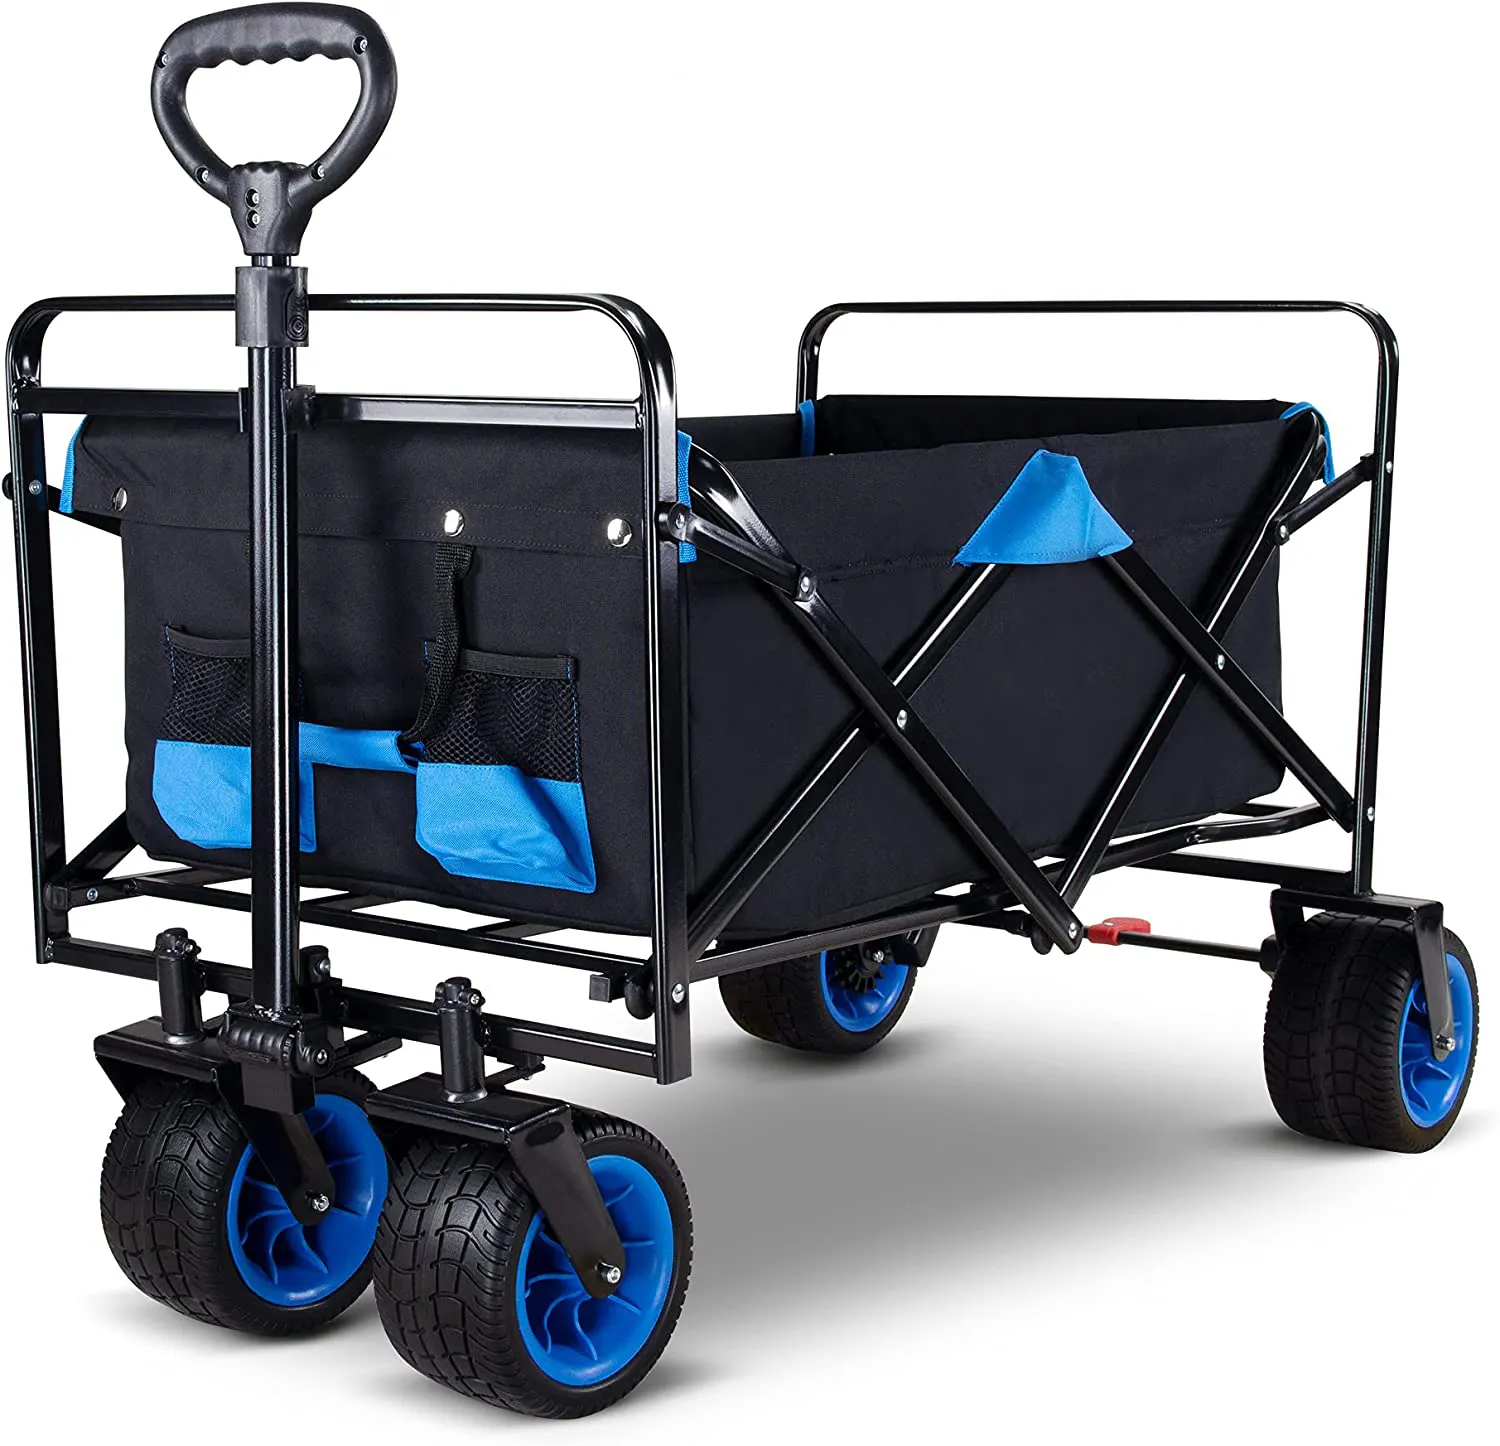 Good price Outdoor camping supplies High quality storage car Camp cart with wheel